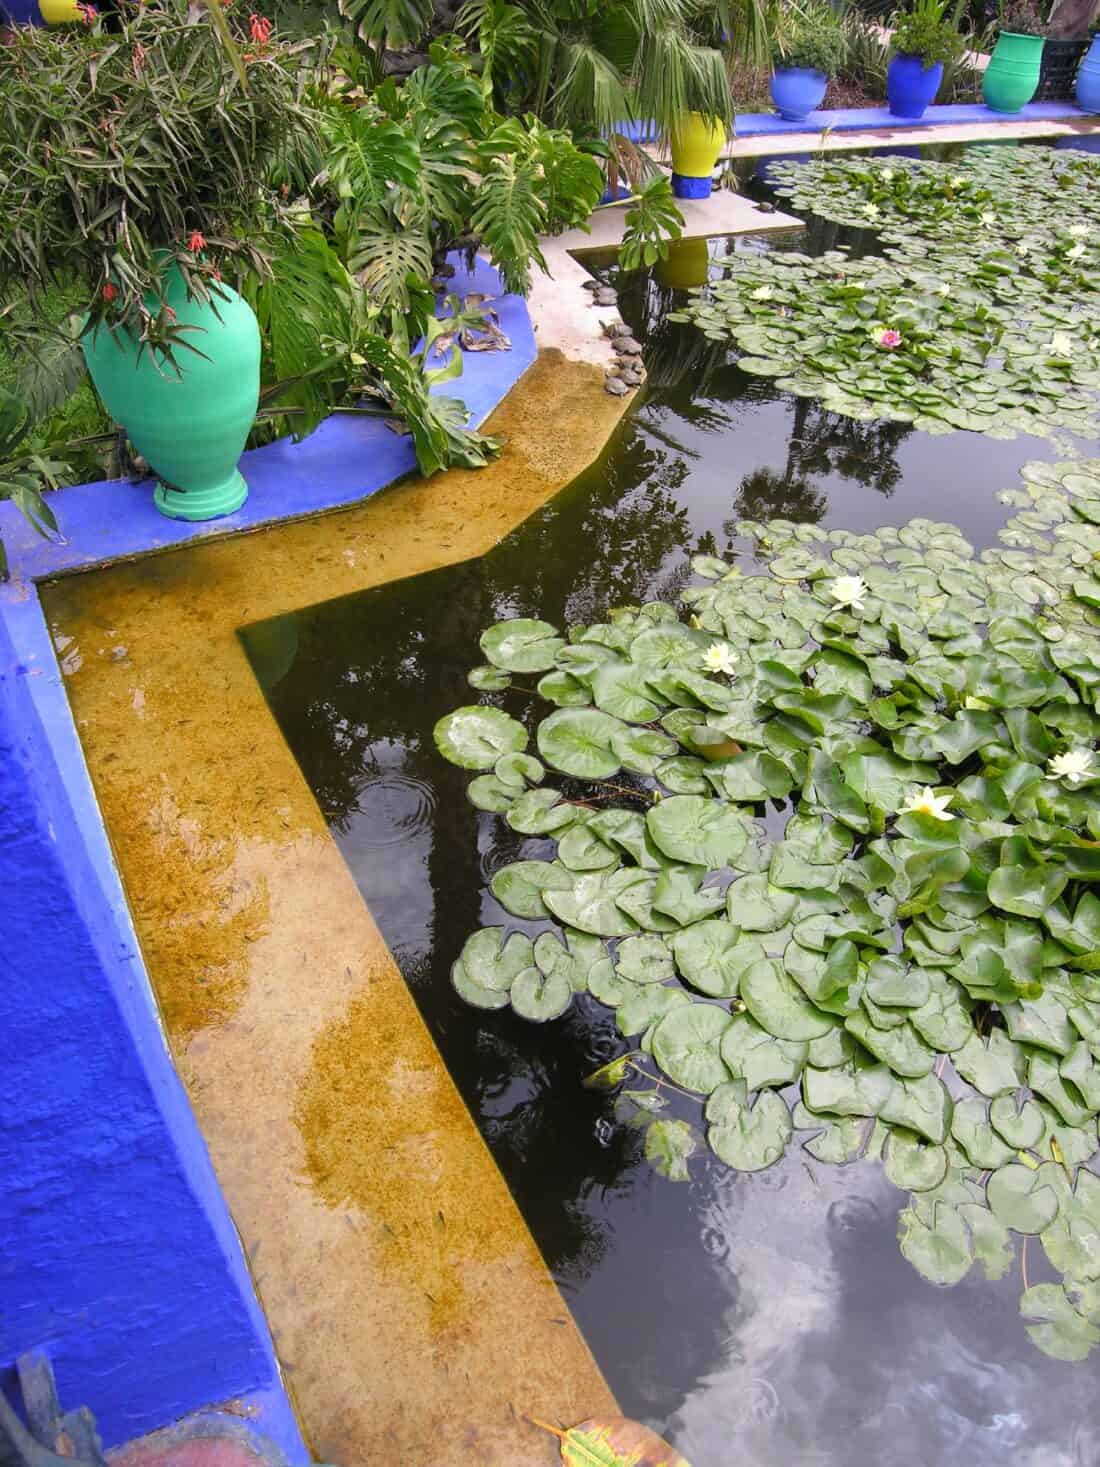 A vibrant Majorelle Garden pond with floating water lilies and blue-painted edging flanked by decorative green vases.